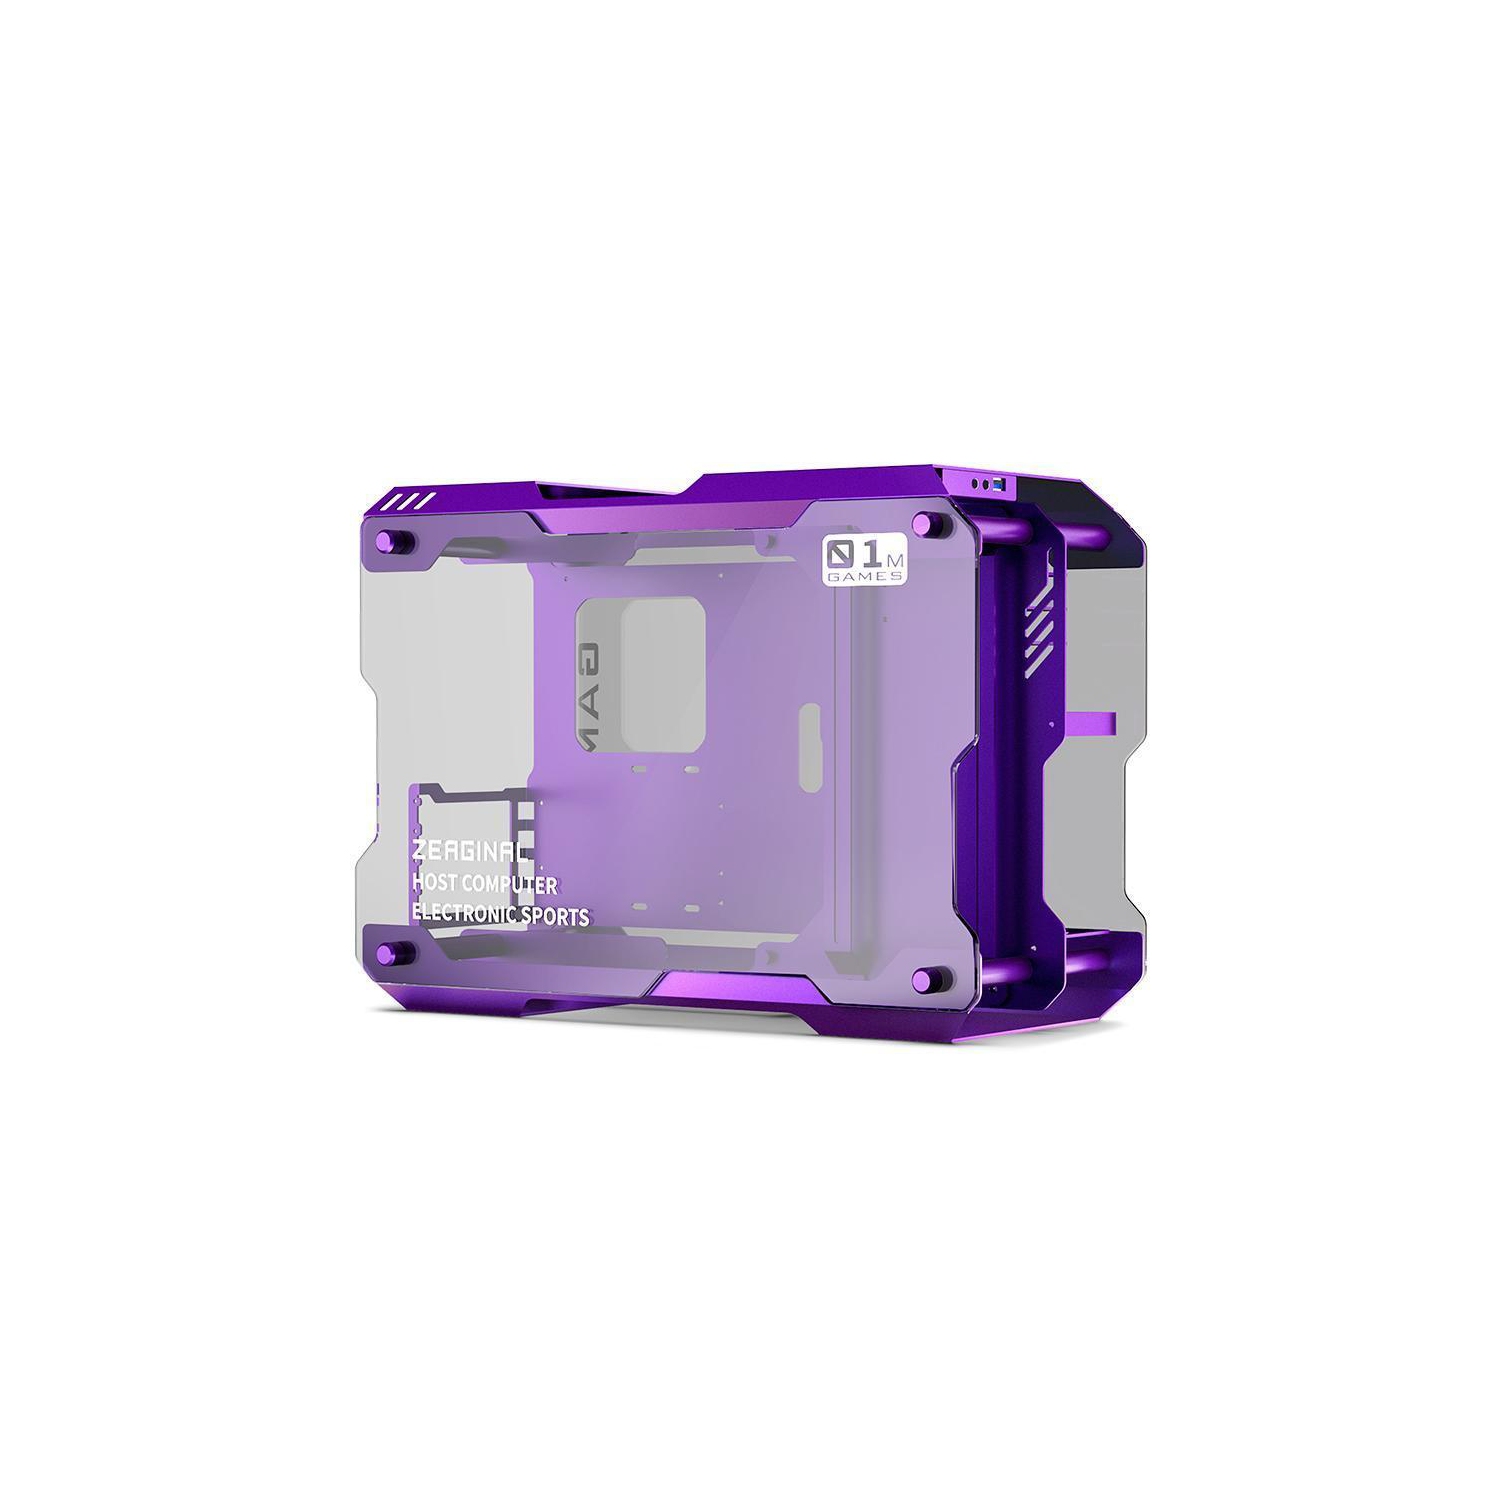 H.E. ZC-01M Mini Tempered Glass Computer Case Support 120MM/ 240mm Radiator Support M-ATX /ITX Motherboard USB 3.0 -Purple (Accessories are not included)